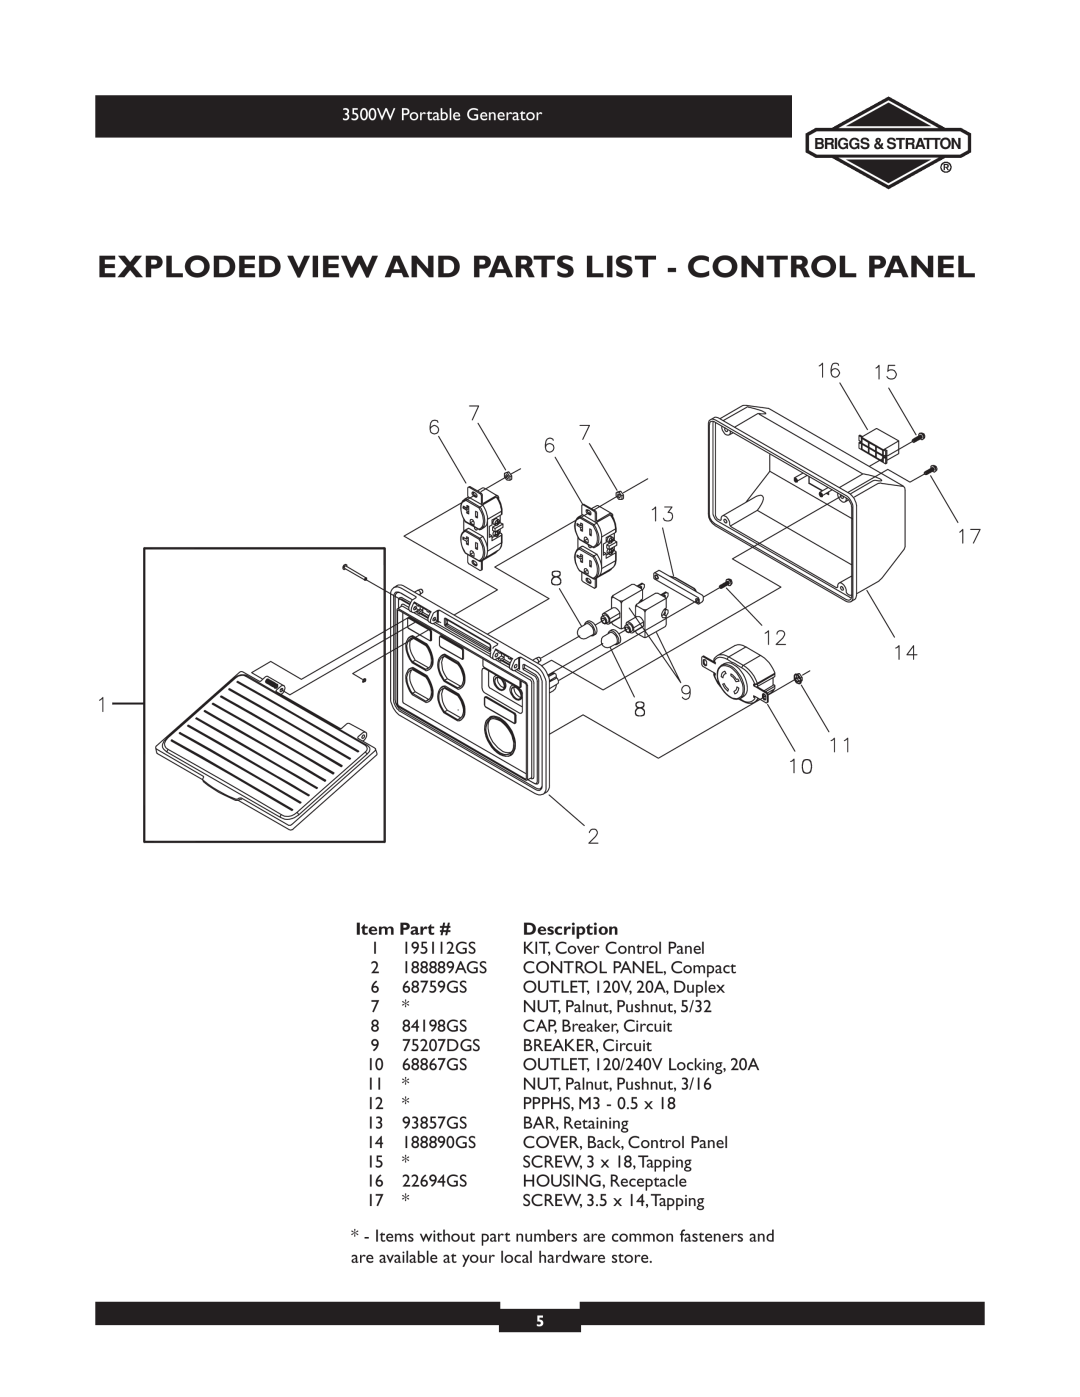 Briggs & Stratton 030208-1 manual Exploded View And Parts List - Control Panel, 3500W Portable Generator, Item Part # 